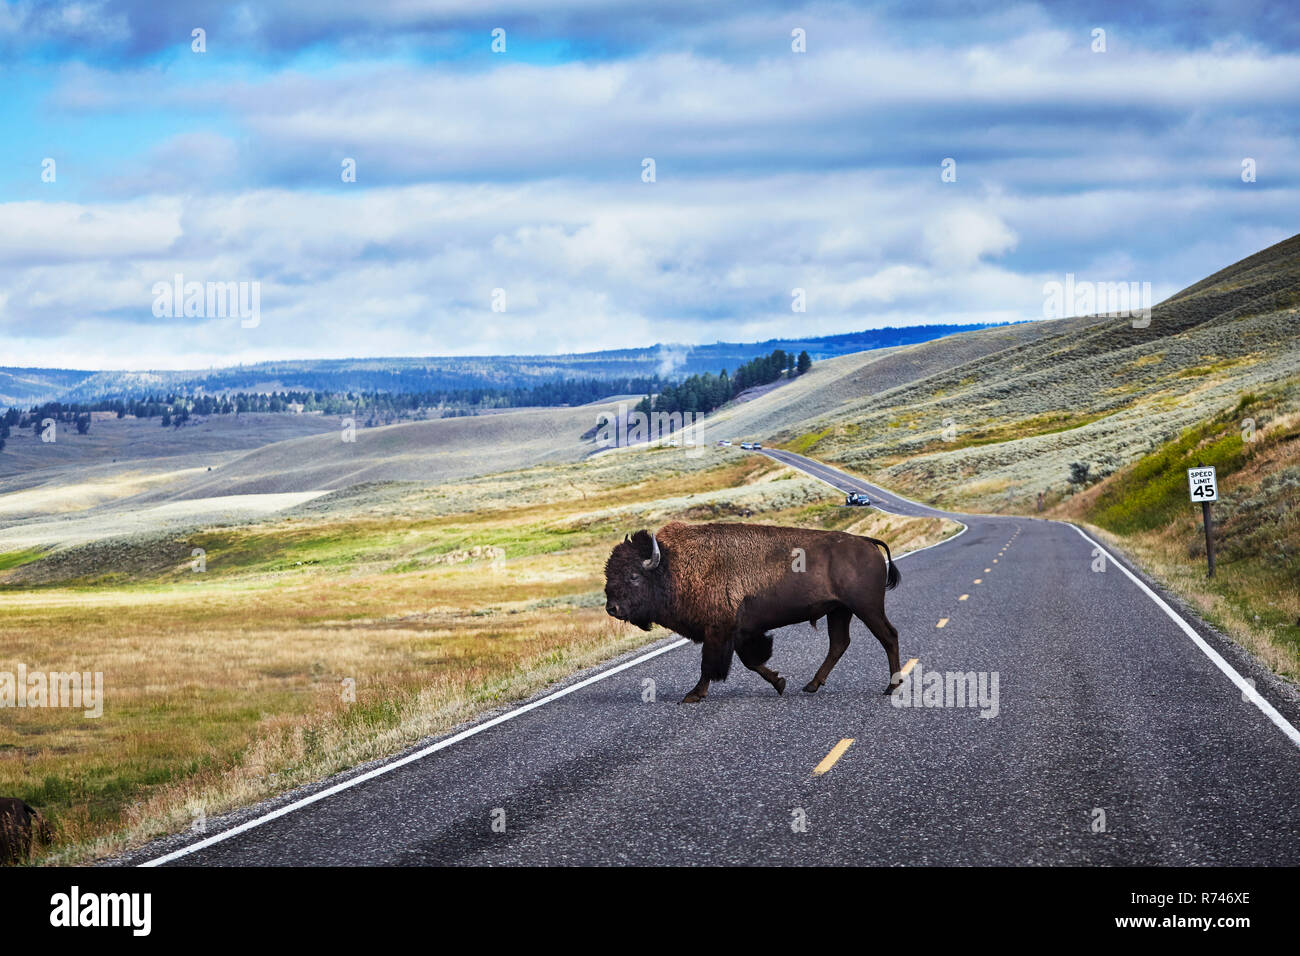 Bison Crossing Road, Yellowstone National Park, Canyon Village, Wyoming, USA Stockfoto